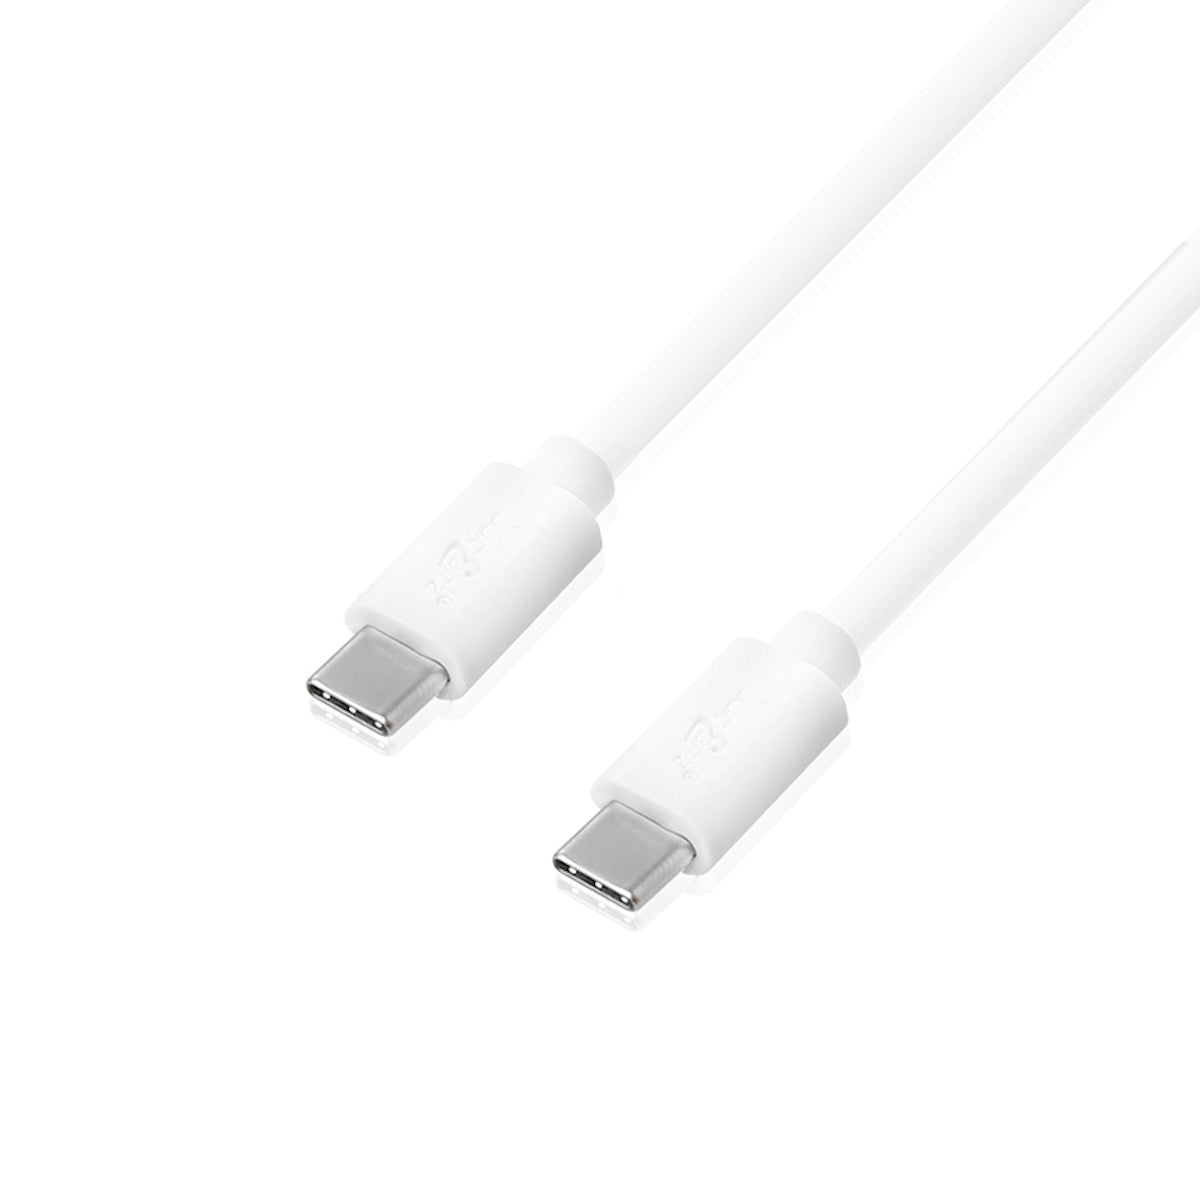 USB-C to USB-C 3A Charger Cable USB 2.0 Data Transfer Lead - White